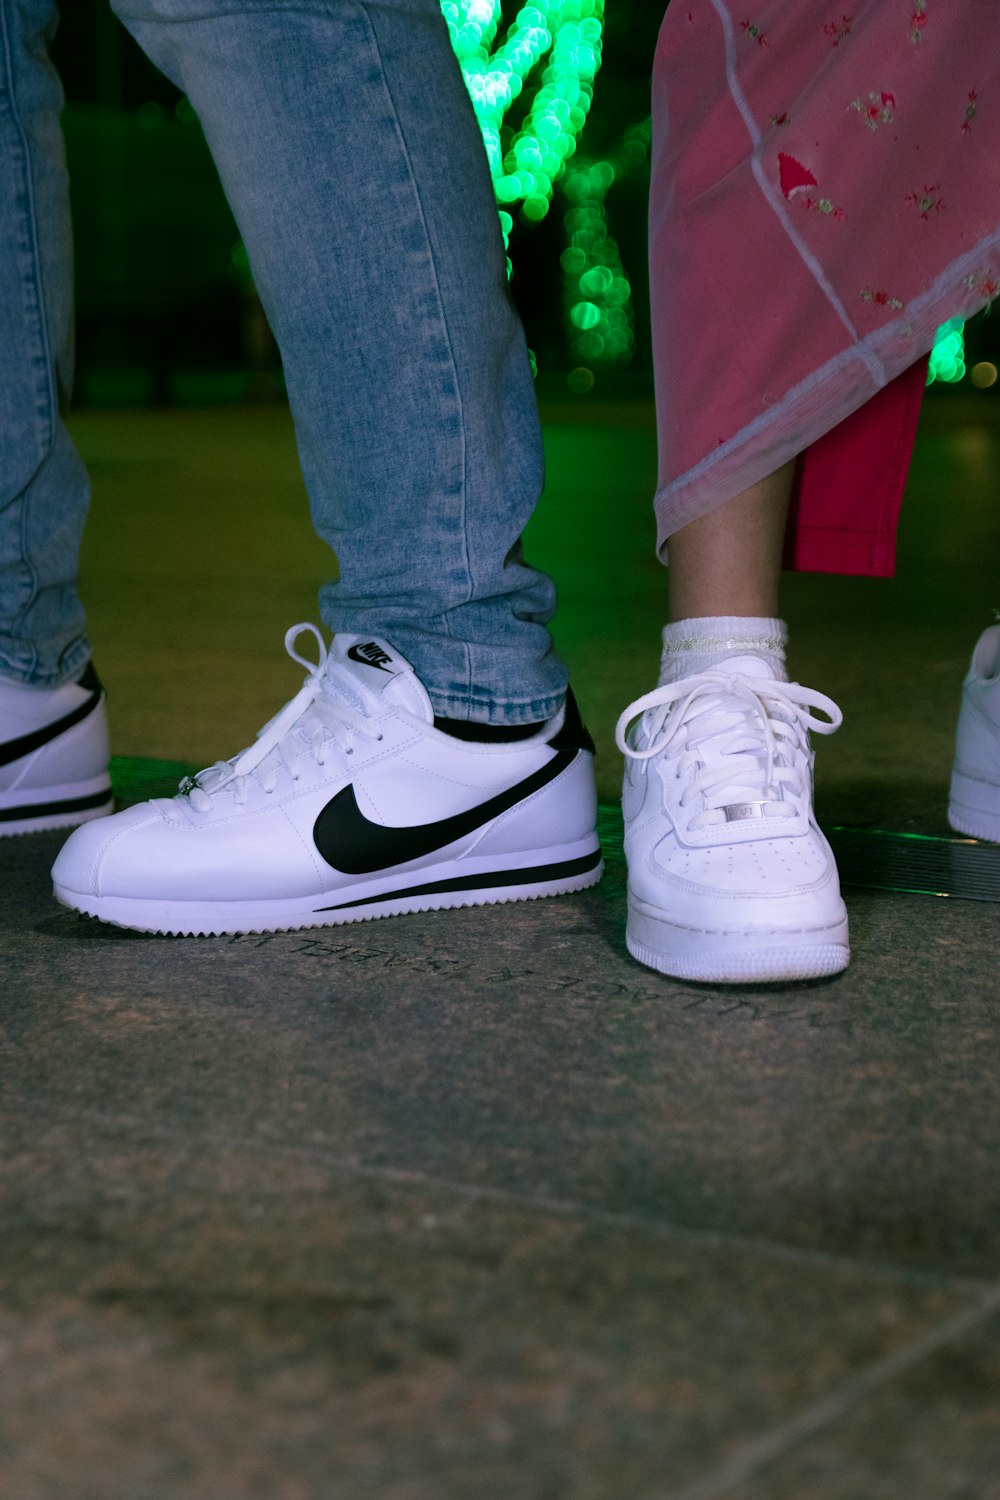 person wearing white and black nike sneakers